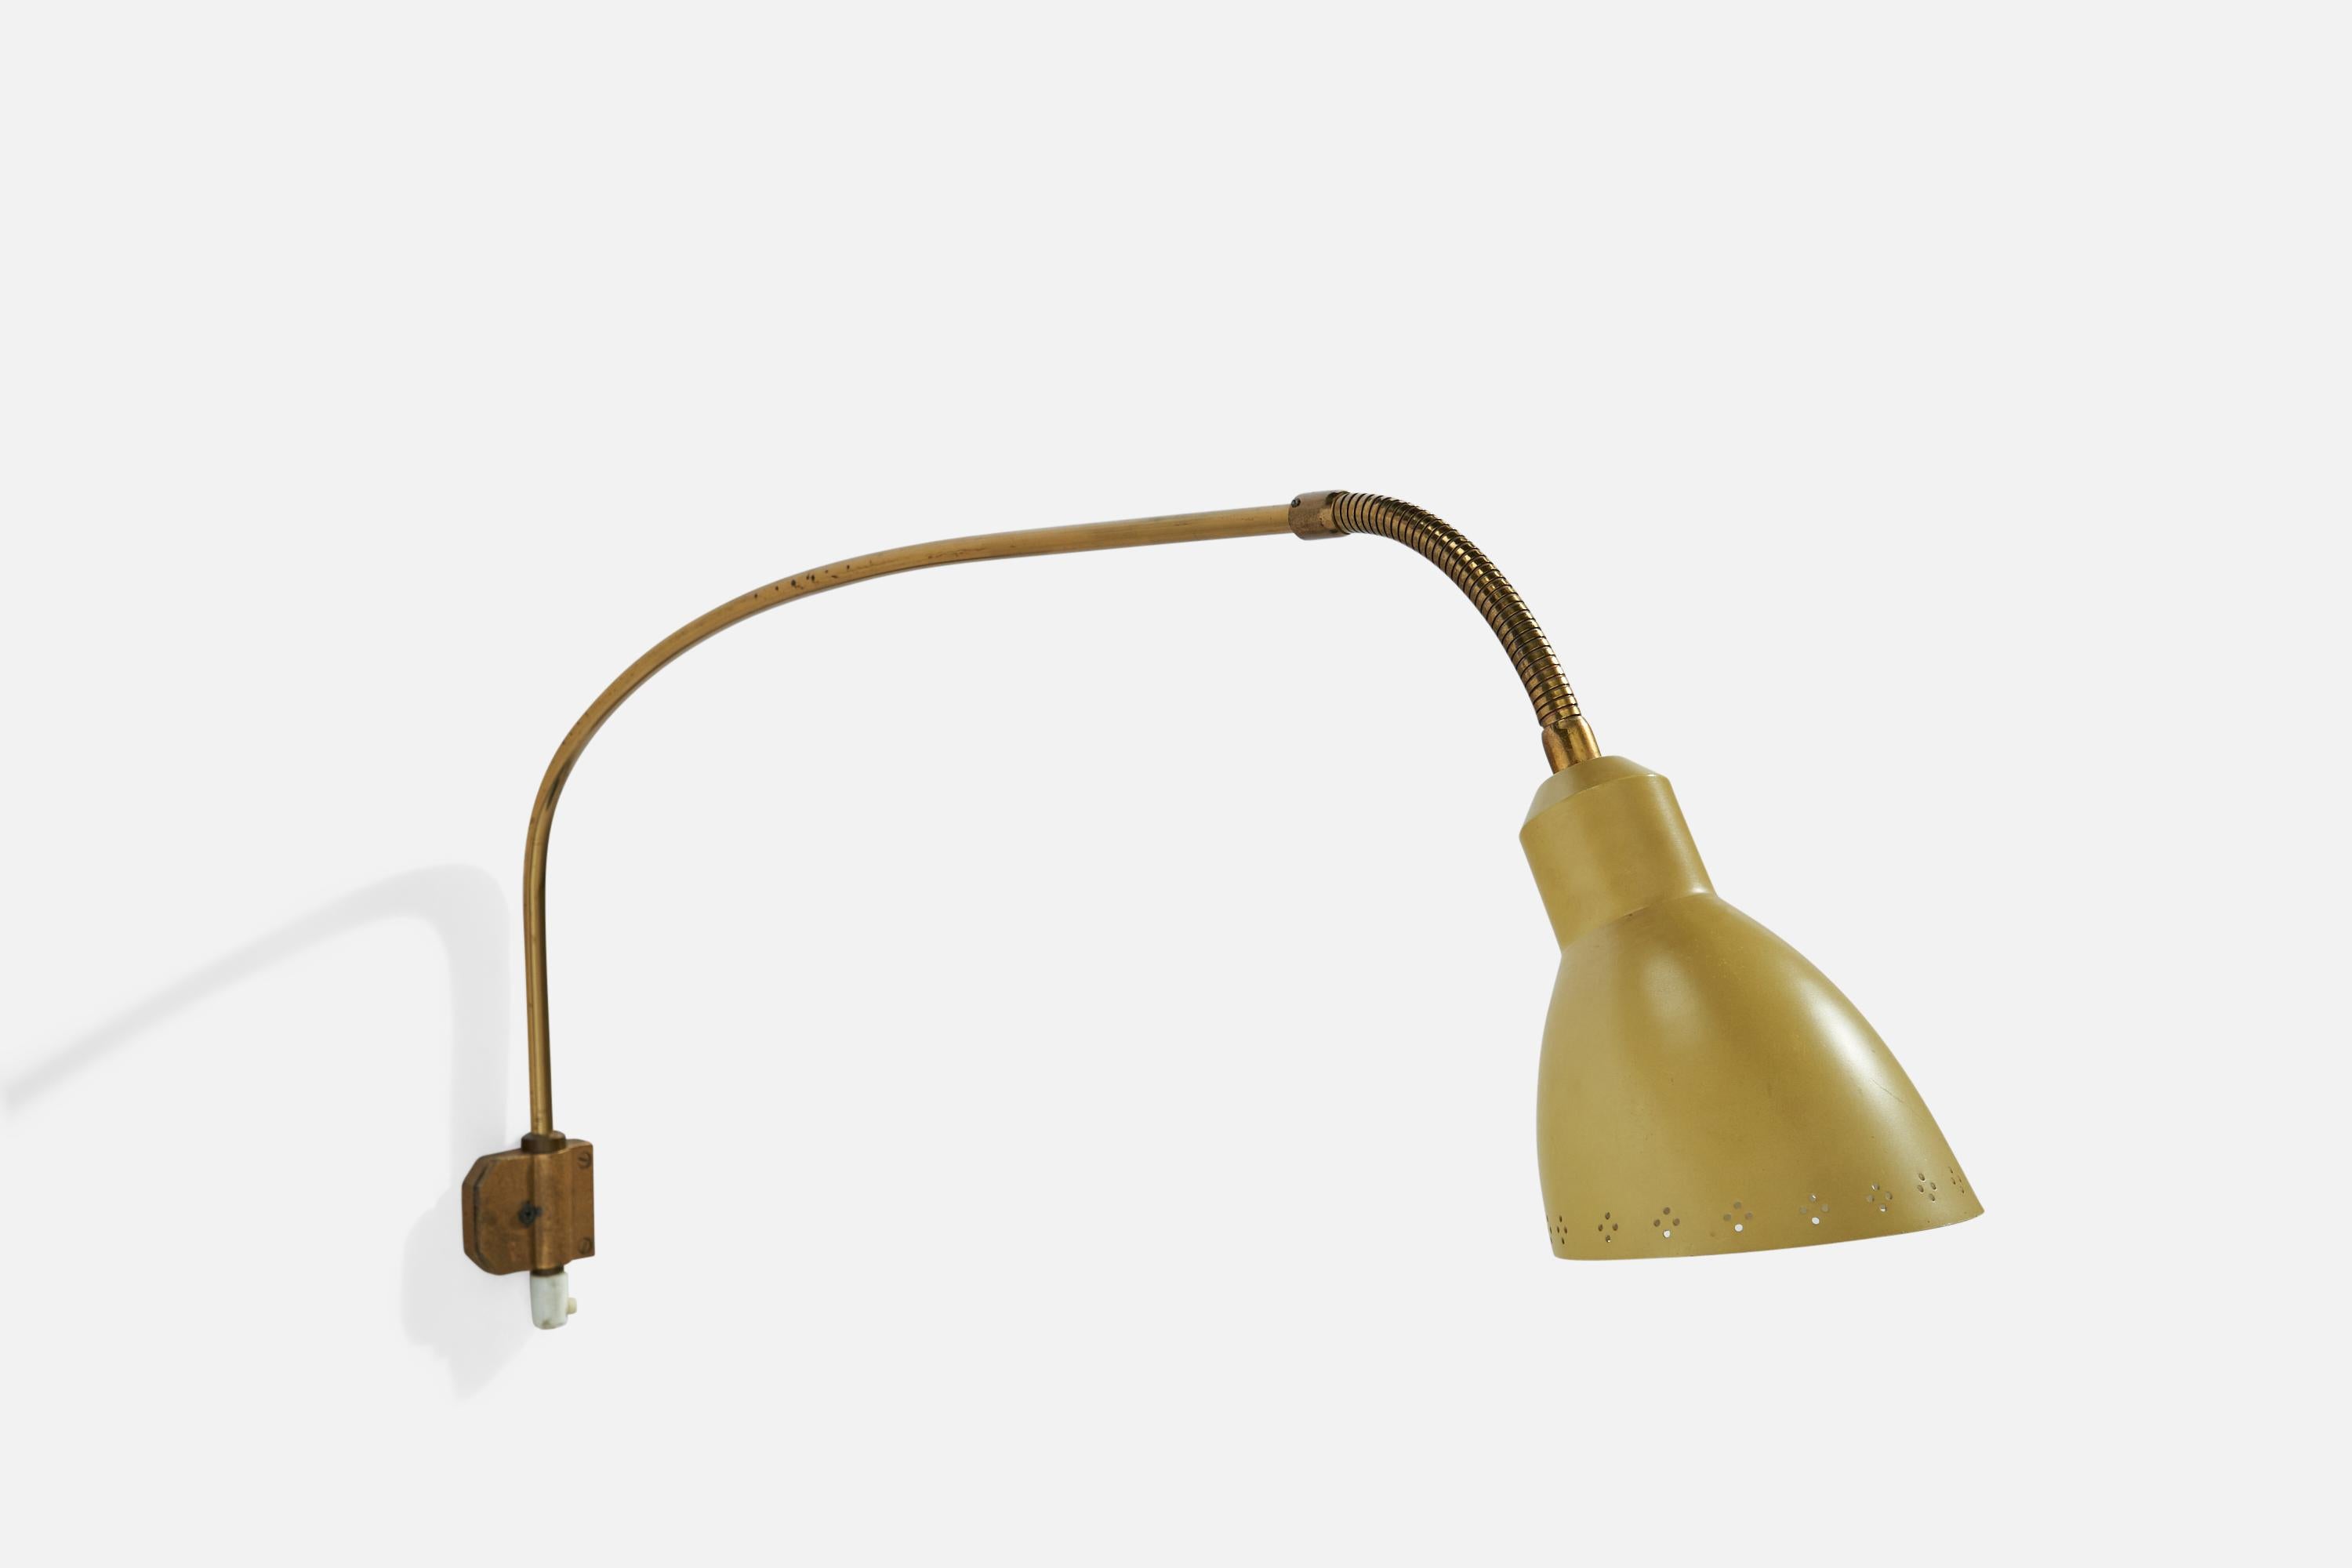 A brass and yellow-lacquered metal wall light designed and produced by AJH, Sweden, 1950s.

Dimensions variable.
Overall Dimensions (inches): 9.5”  H x 19”  W x 26” D
Back Plate Dimensions (inches): N/A
Bulb Specifications: E-26 Bulb
Number of